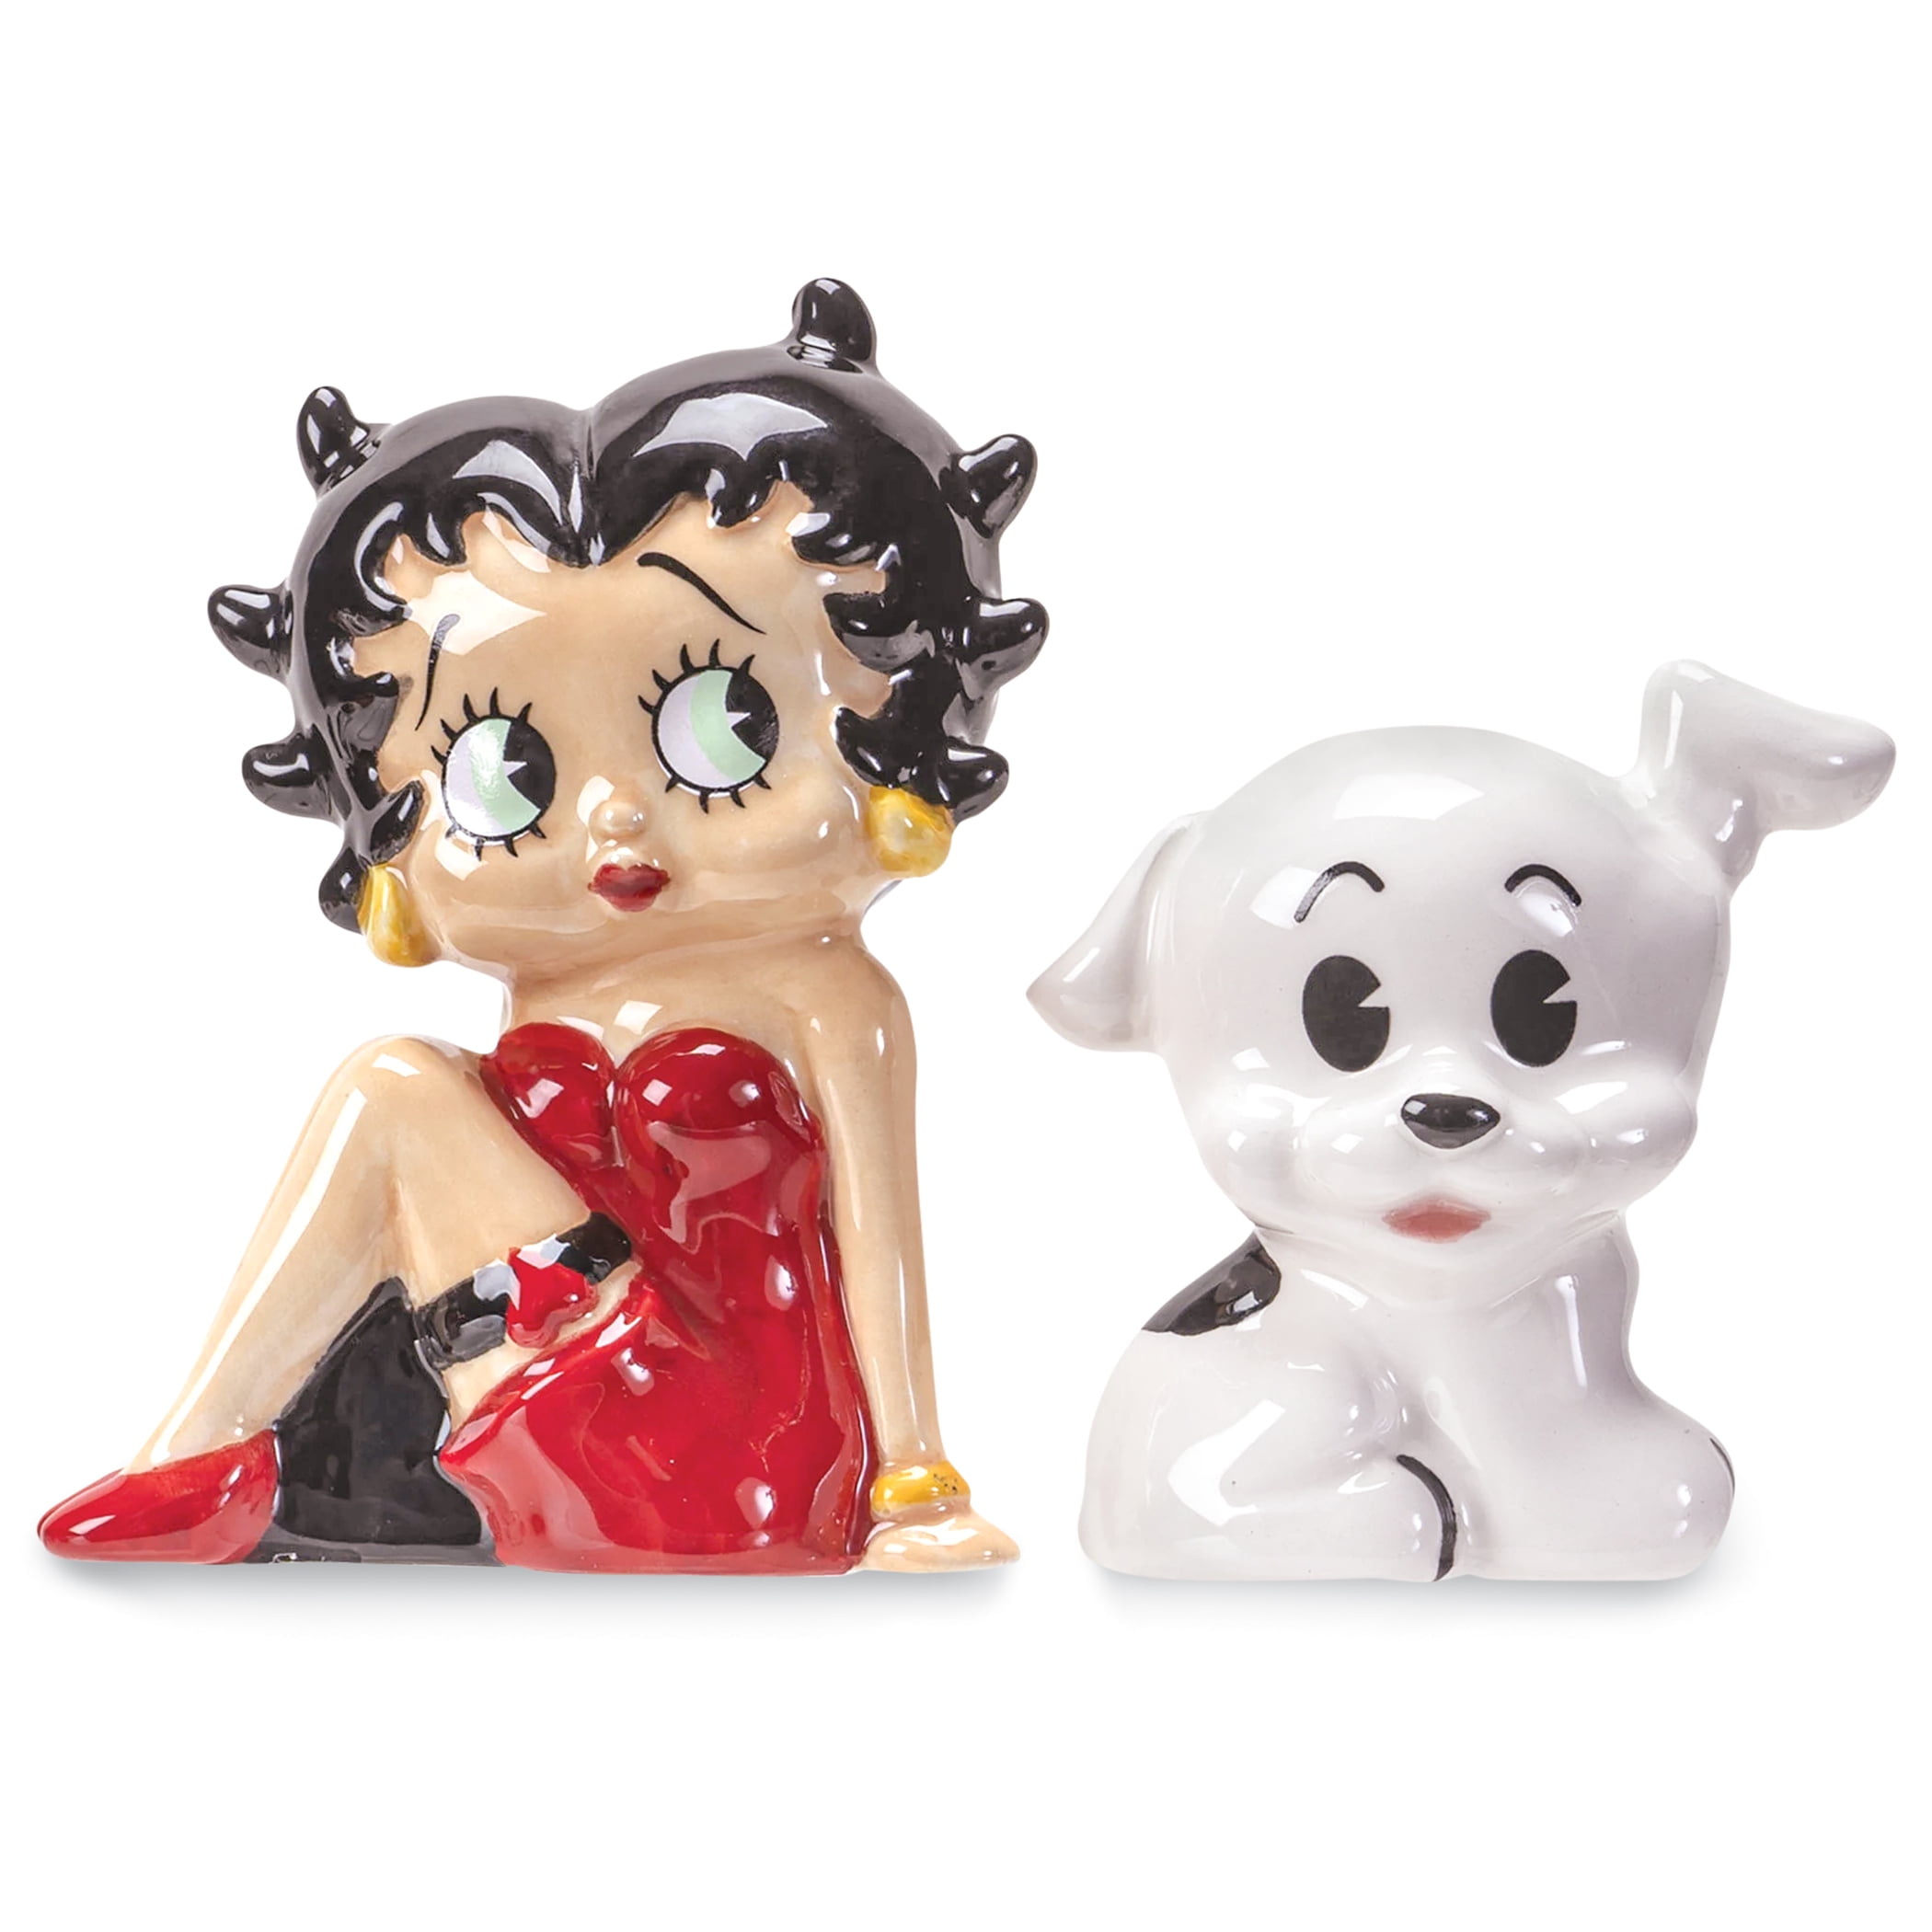 Angel Or Devil Betty Boop With Halo And Horns Ceramic Salt And Pepper Shakers 